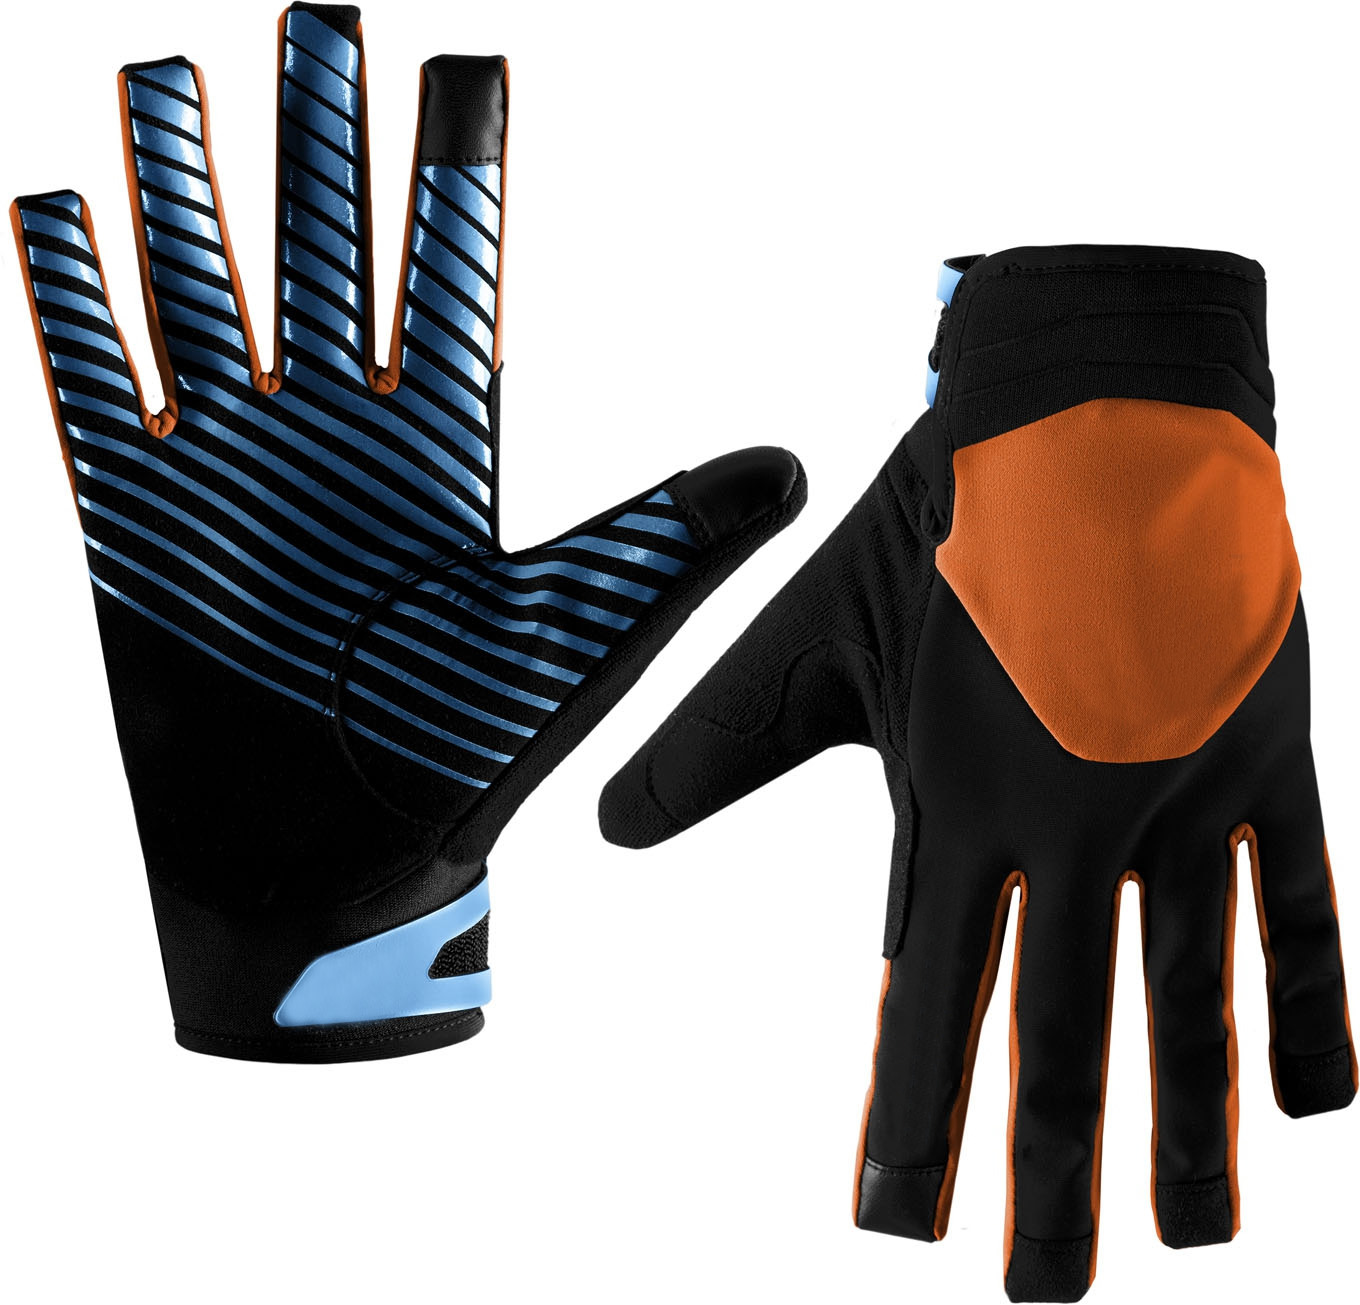 Windproof bicycle gloves softshell silicone grip palm bike gloves comfortable wear